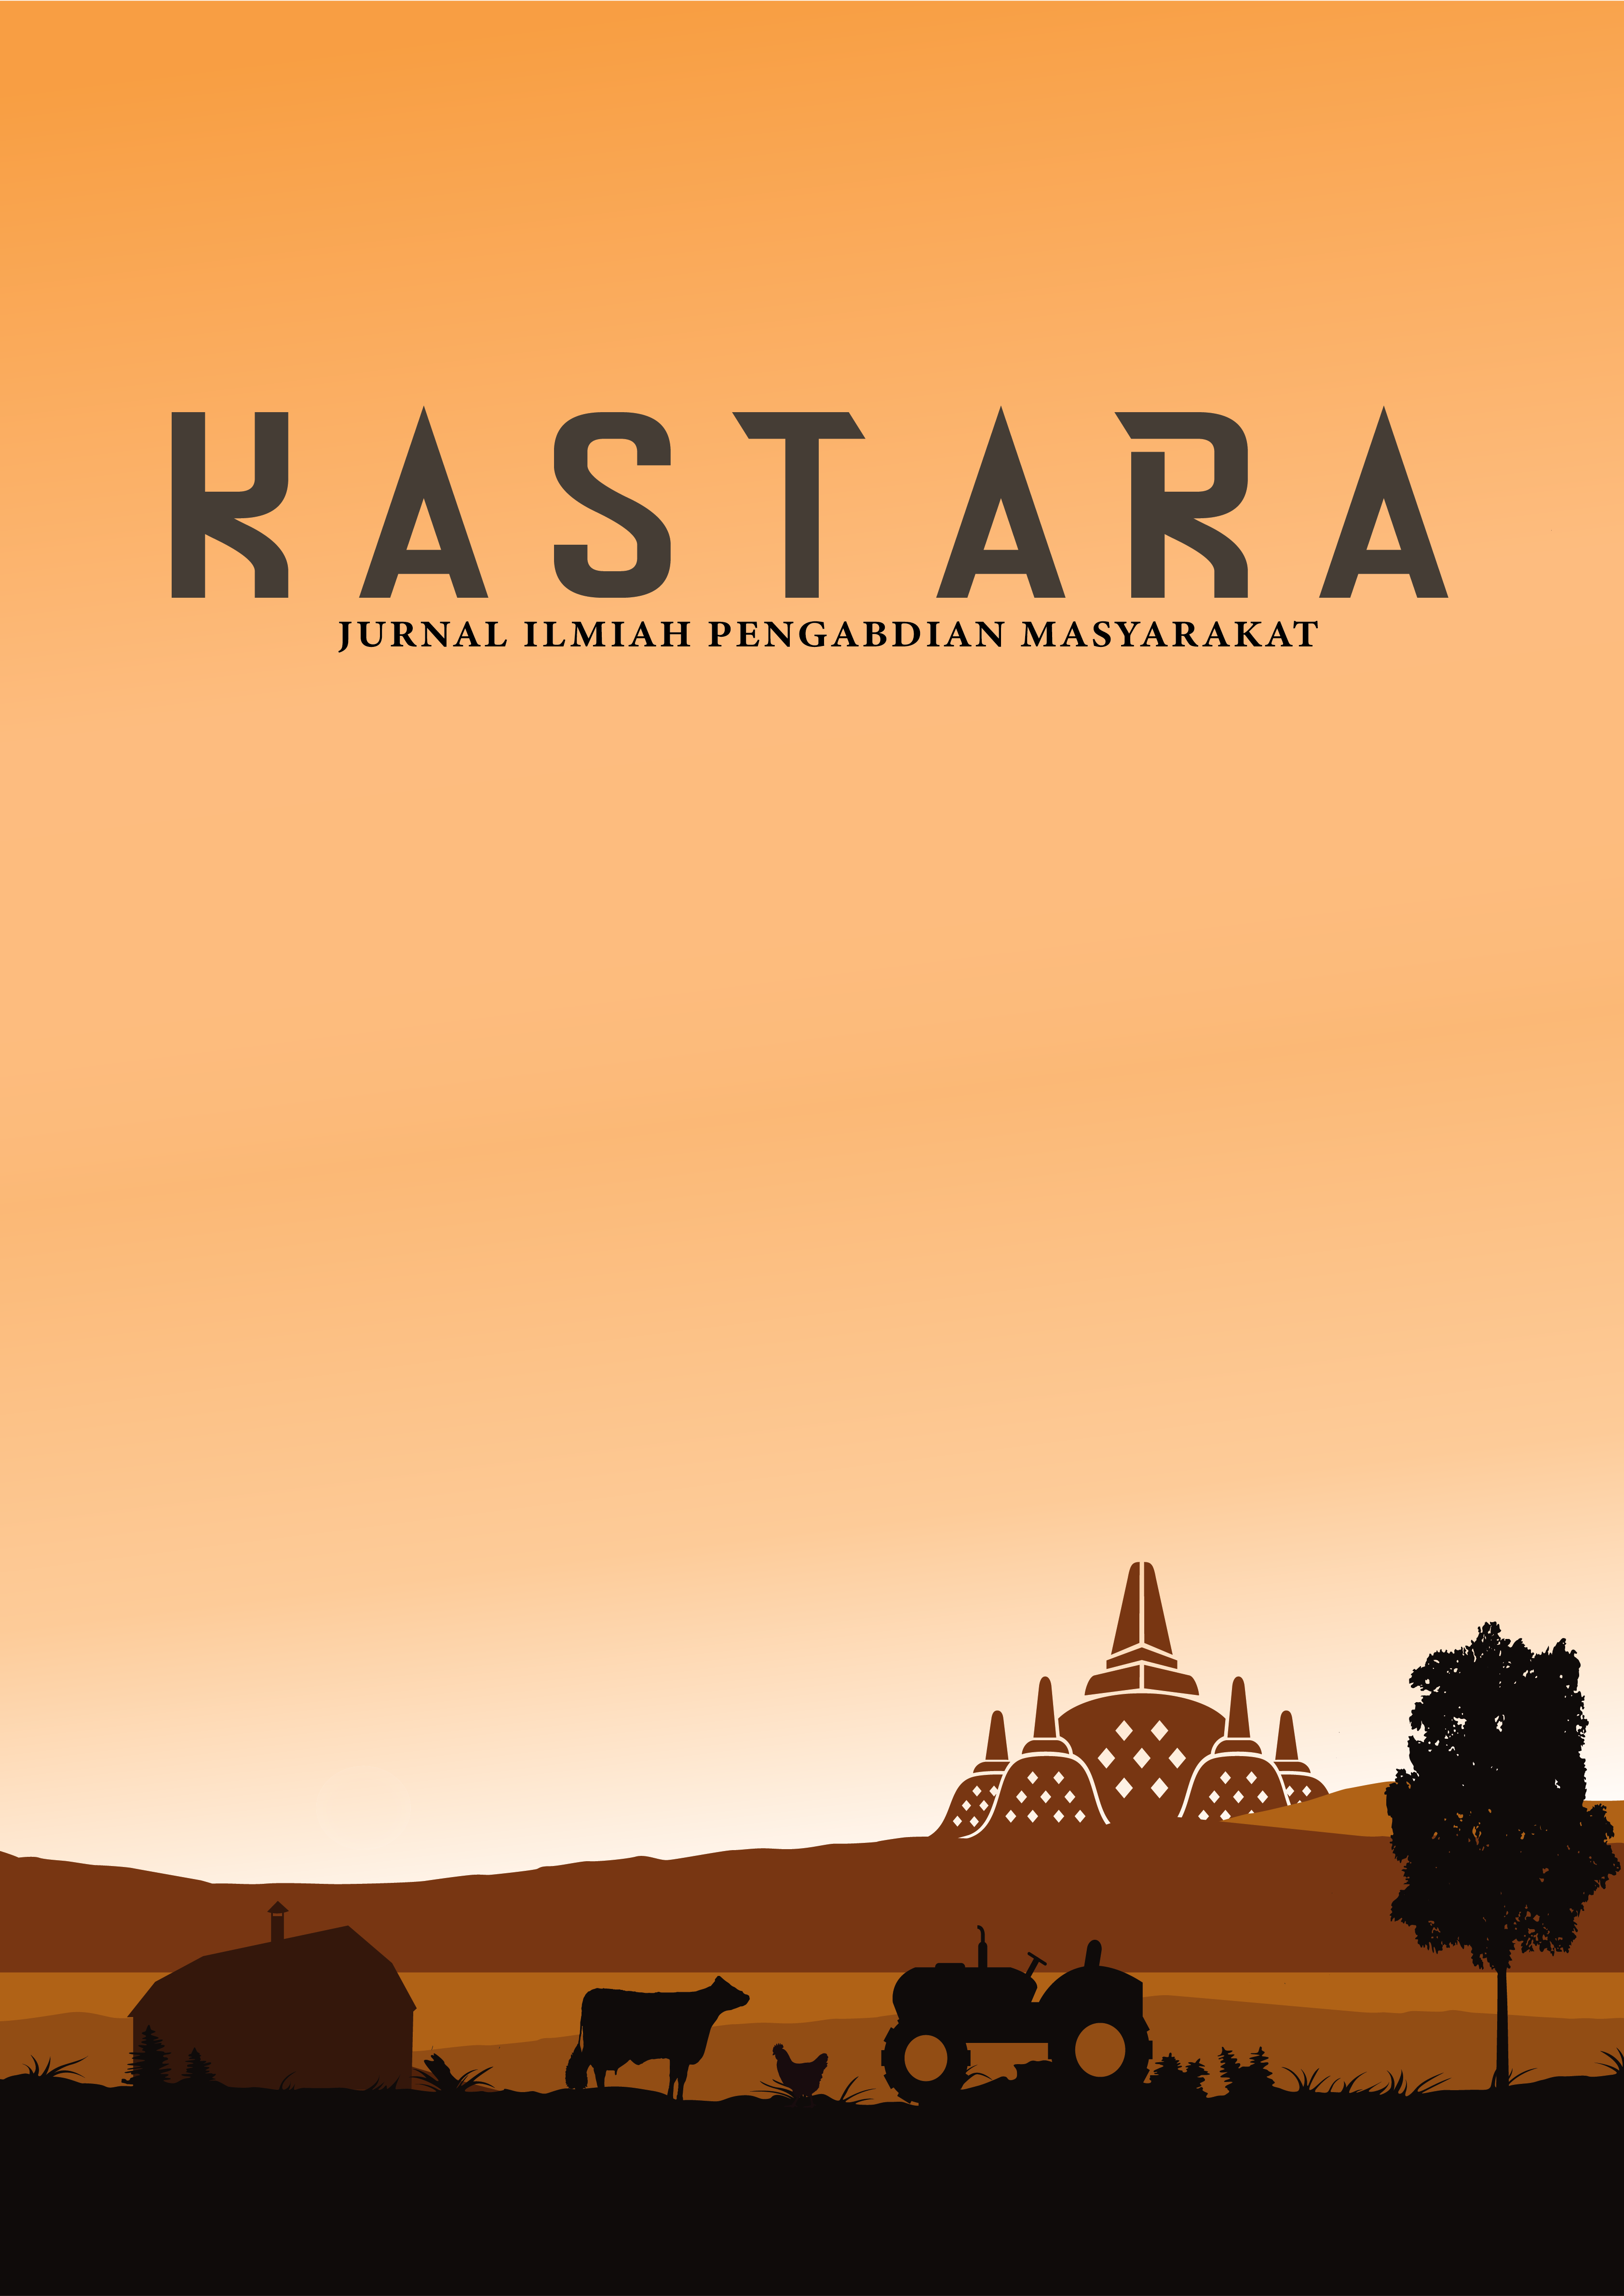 KASTARA is community service activities related to agricultural product technology, agricultural engineering, agricultural industrial technology, nutrition and public health, pharmacy, biology, climatology, agroecotechnology, soil science, agricultural cultivation, plant protection, medicine , family and consumers, livestock, fisheries, forestry, conservation, environment, socio-economics, engineering, and entrepreneurship